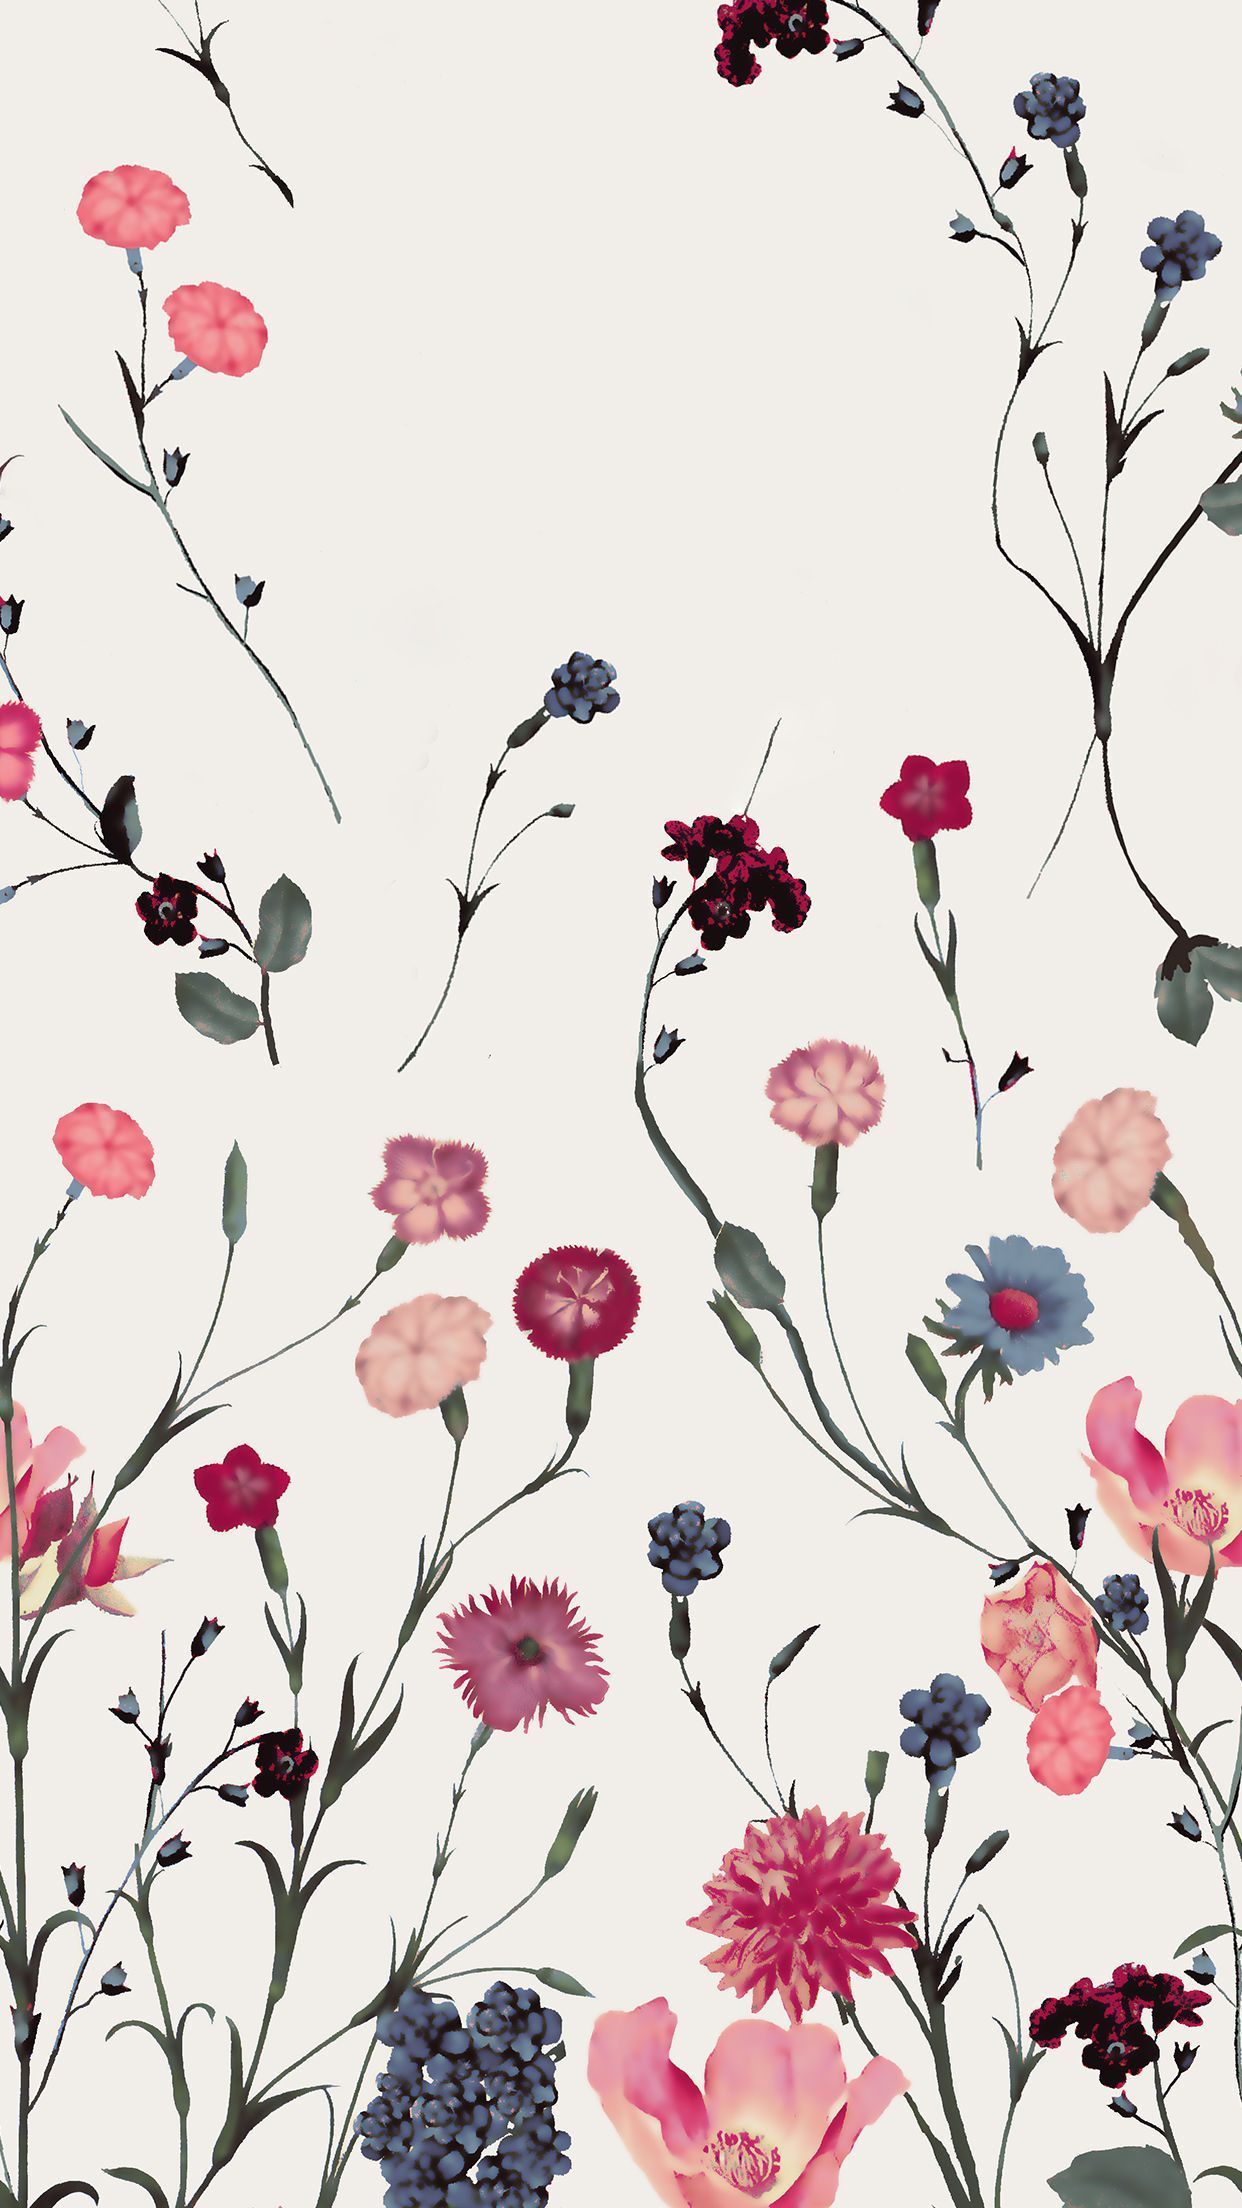 floral wallpapers for iphone